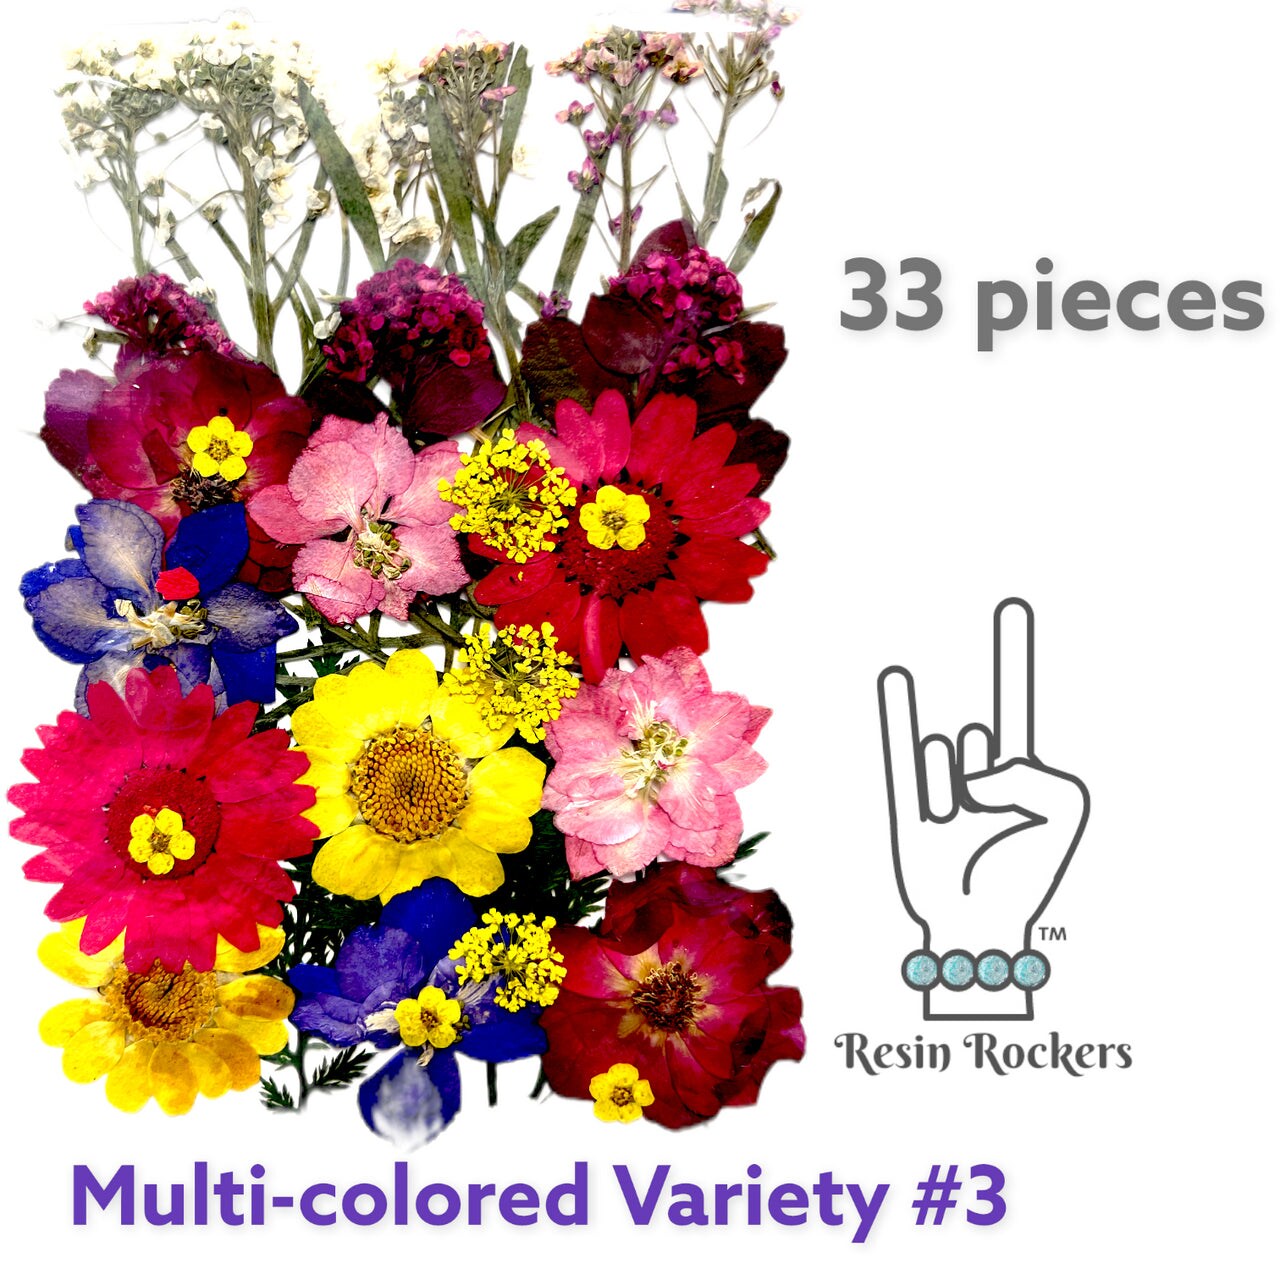 33 Piece Multi-colored Variety #3 Dried Pressed Real Natural